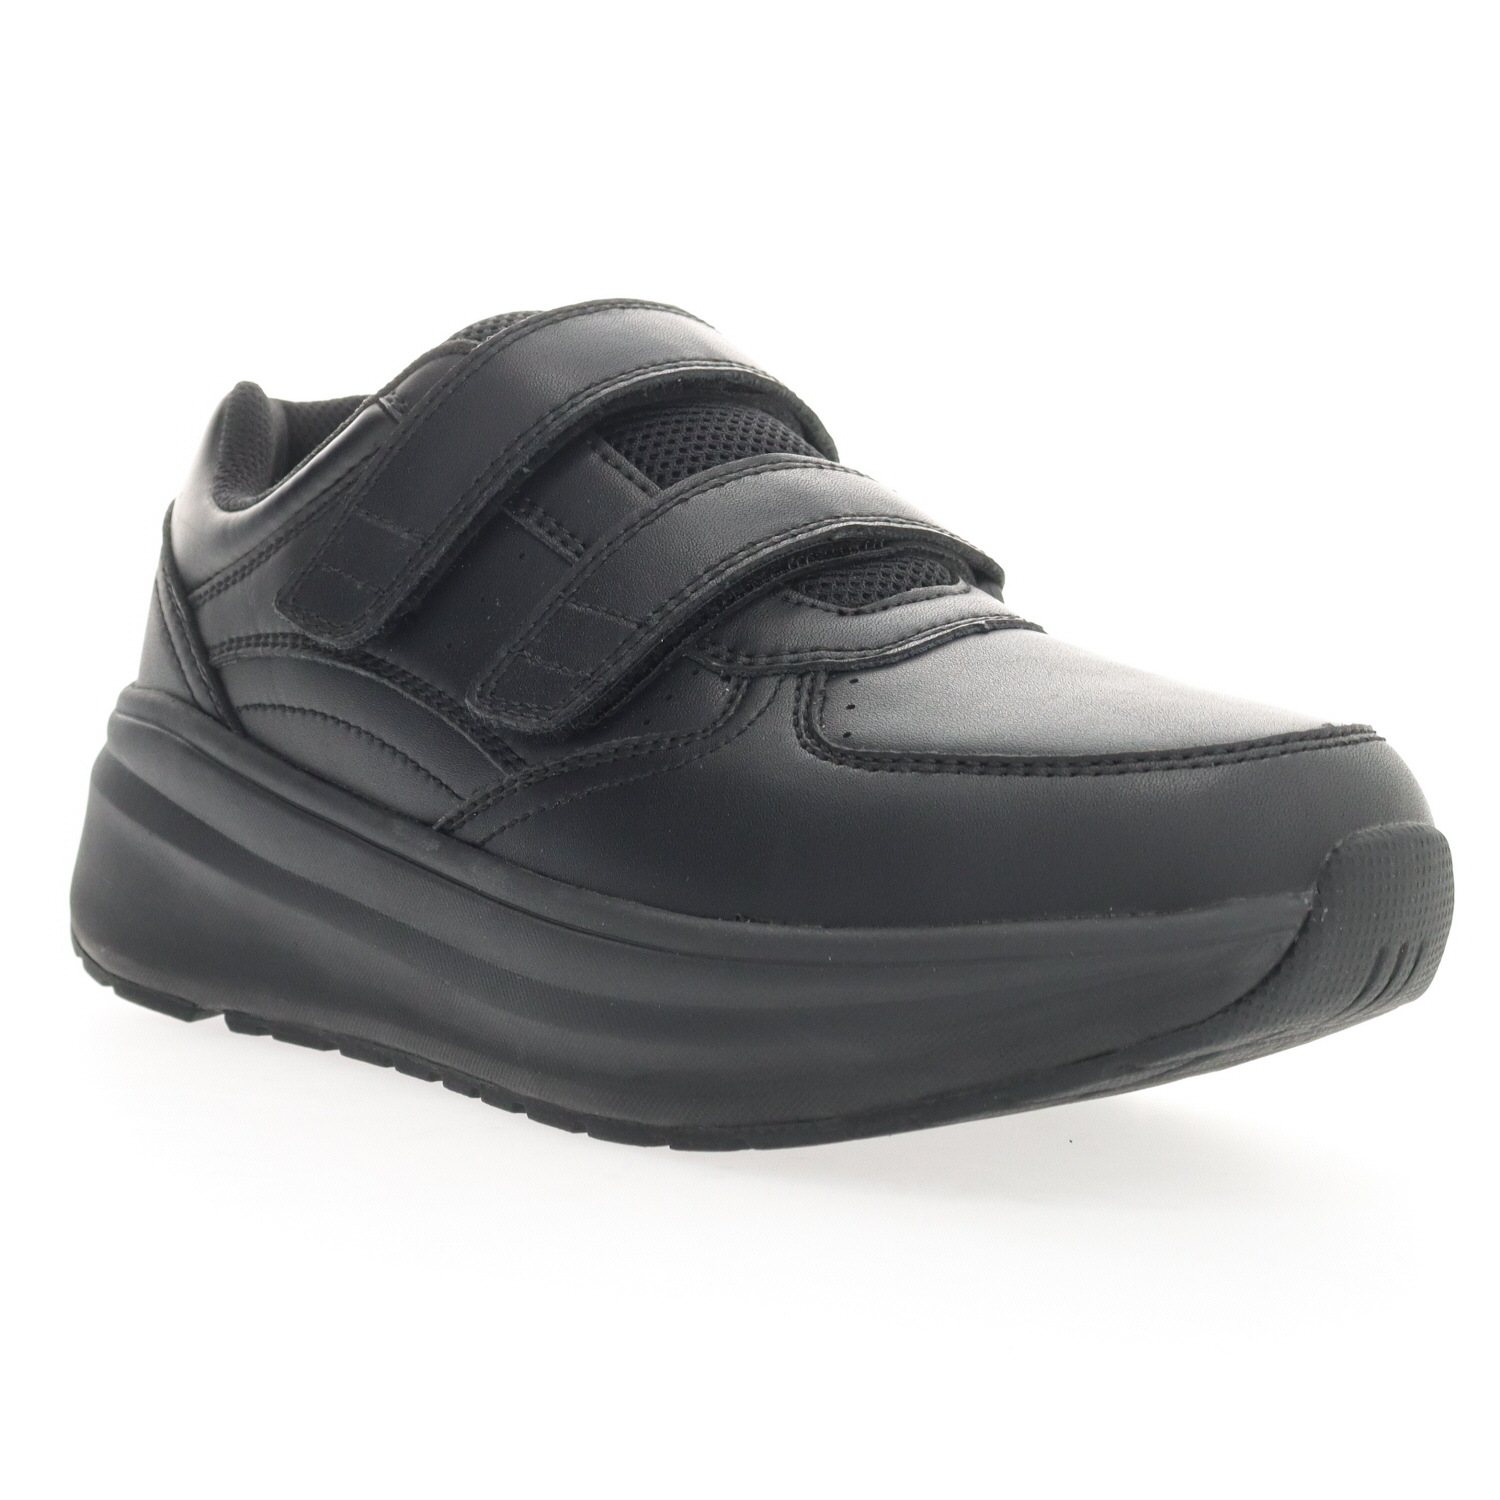 Women's Light Weigth Athletic Shoe | Ultima Strap